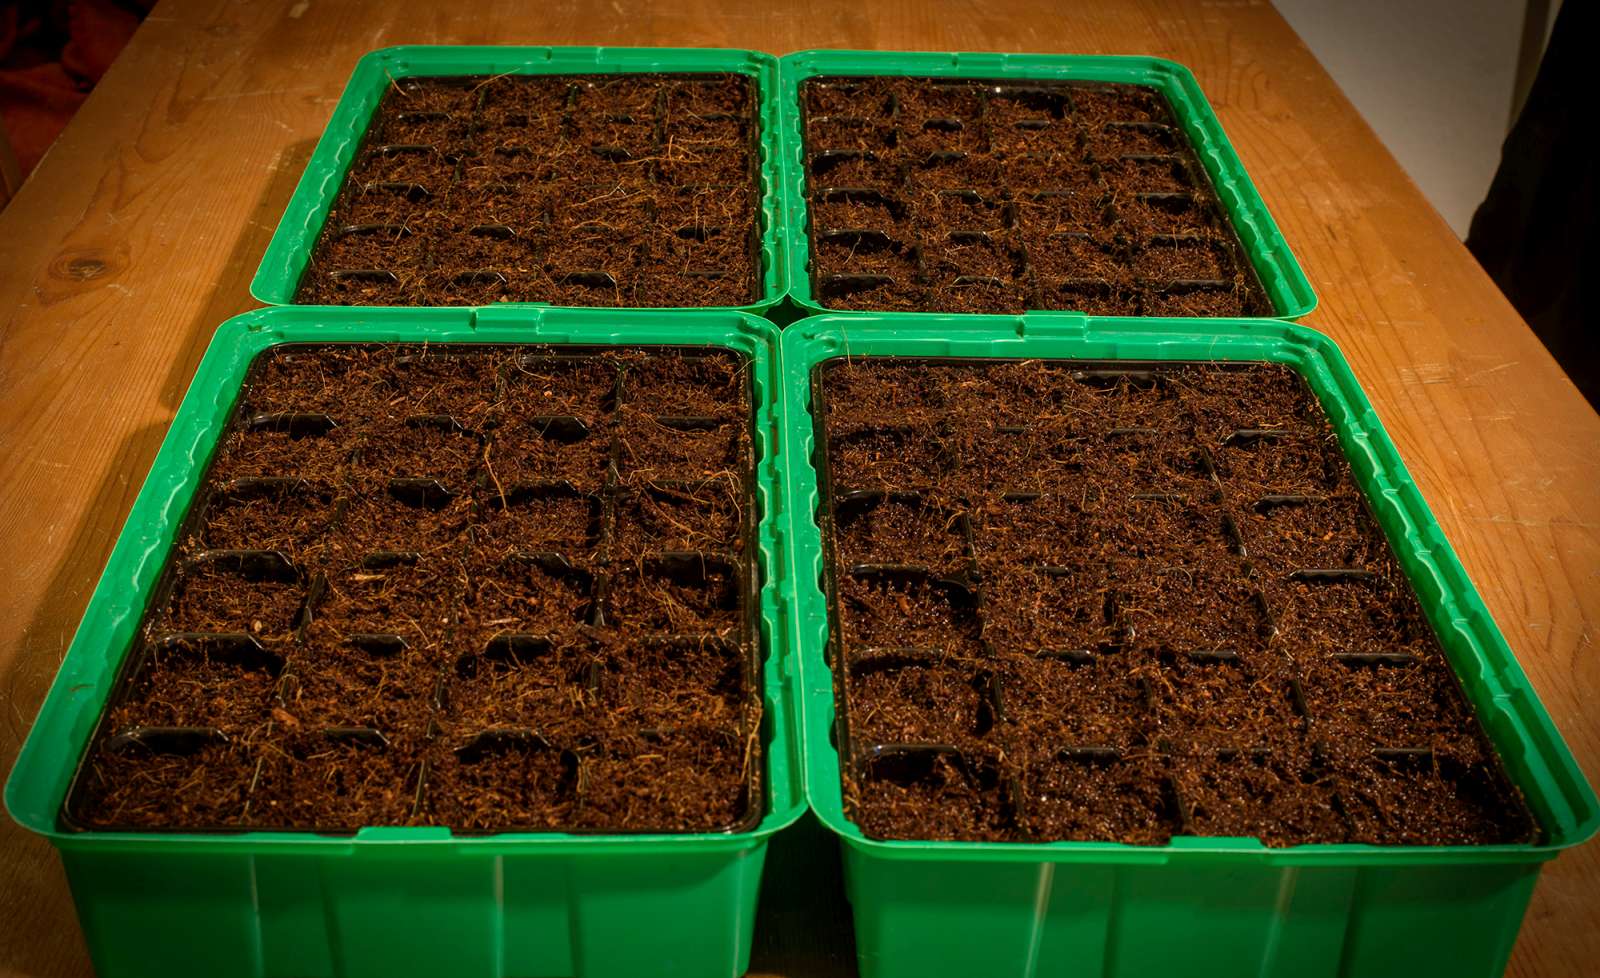 Freshly germinated seeds getting ready for action